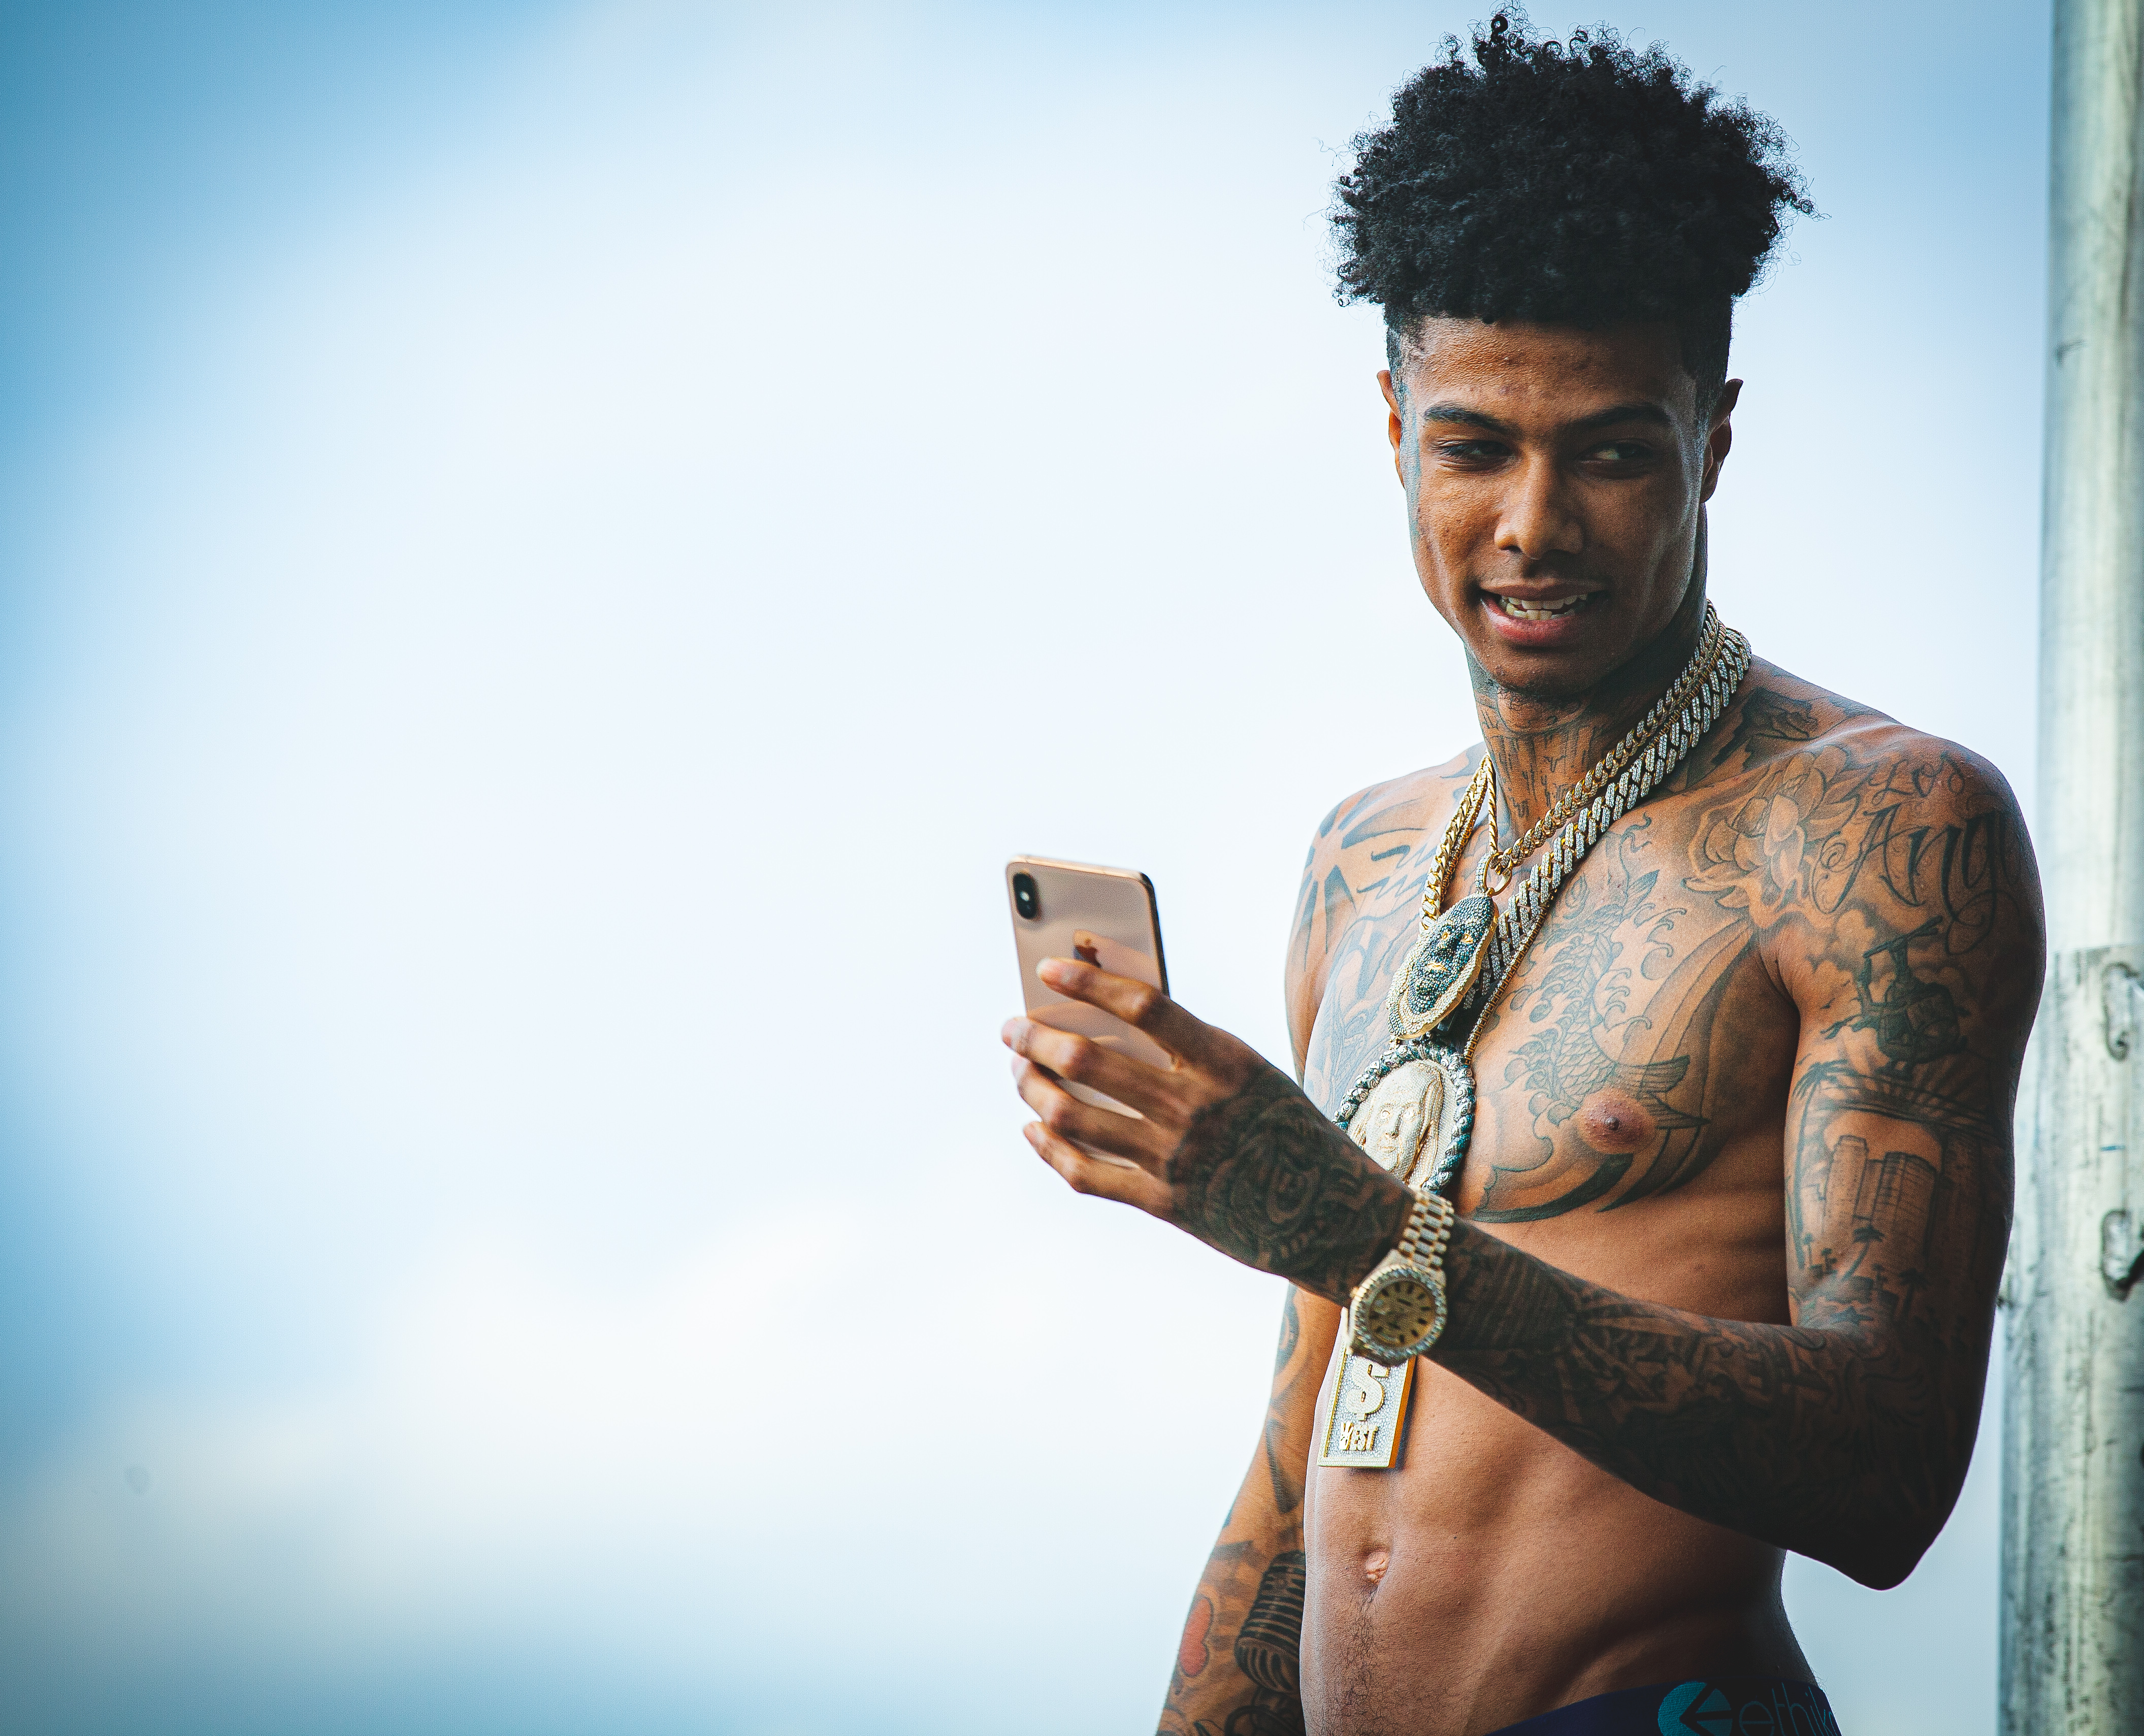 Chrisean Gets Another Blueface Neck Tattoo Social Media Fumes